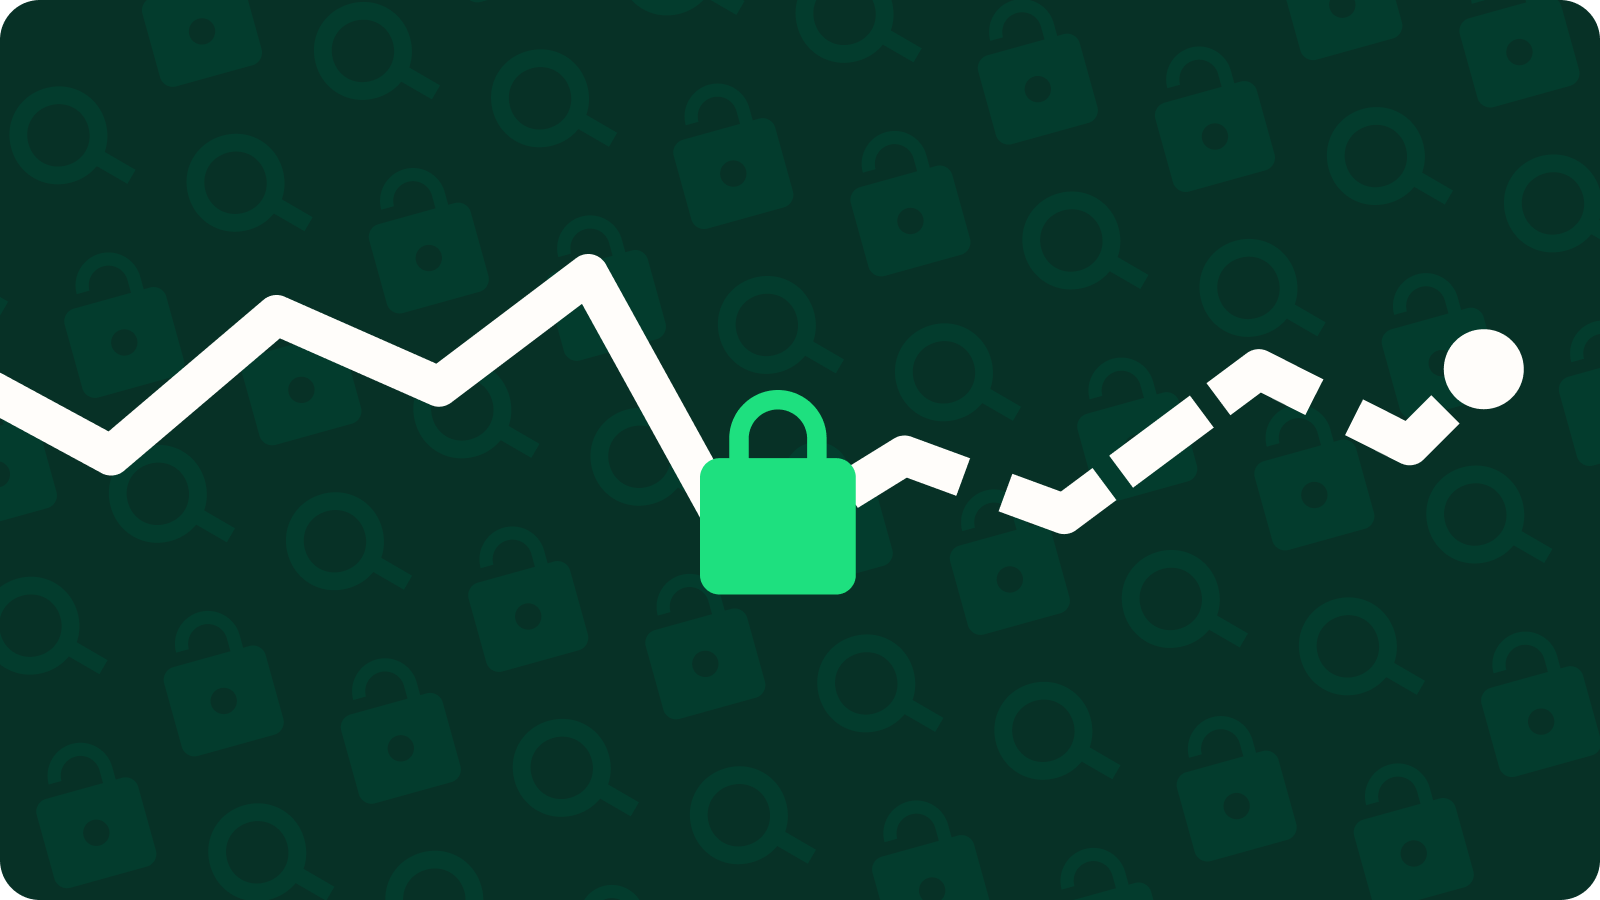 Look Before You Lock - Dark Graphic Green Image with Line Graph and Lock